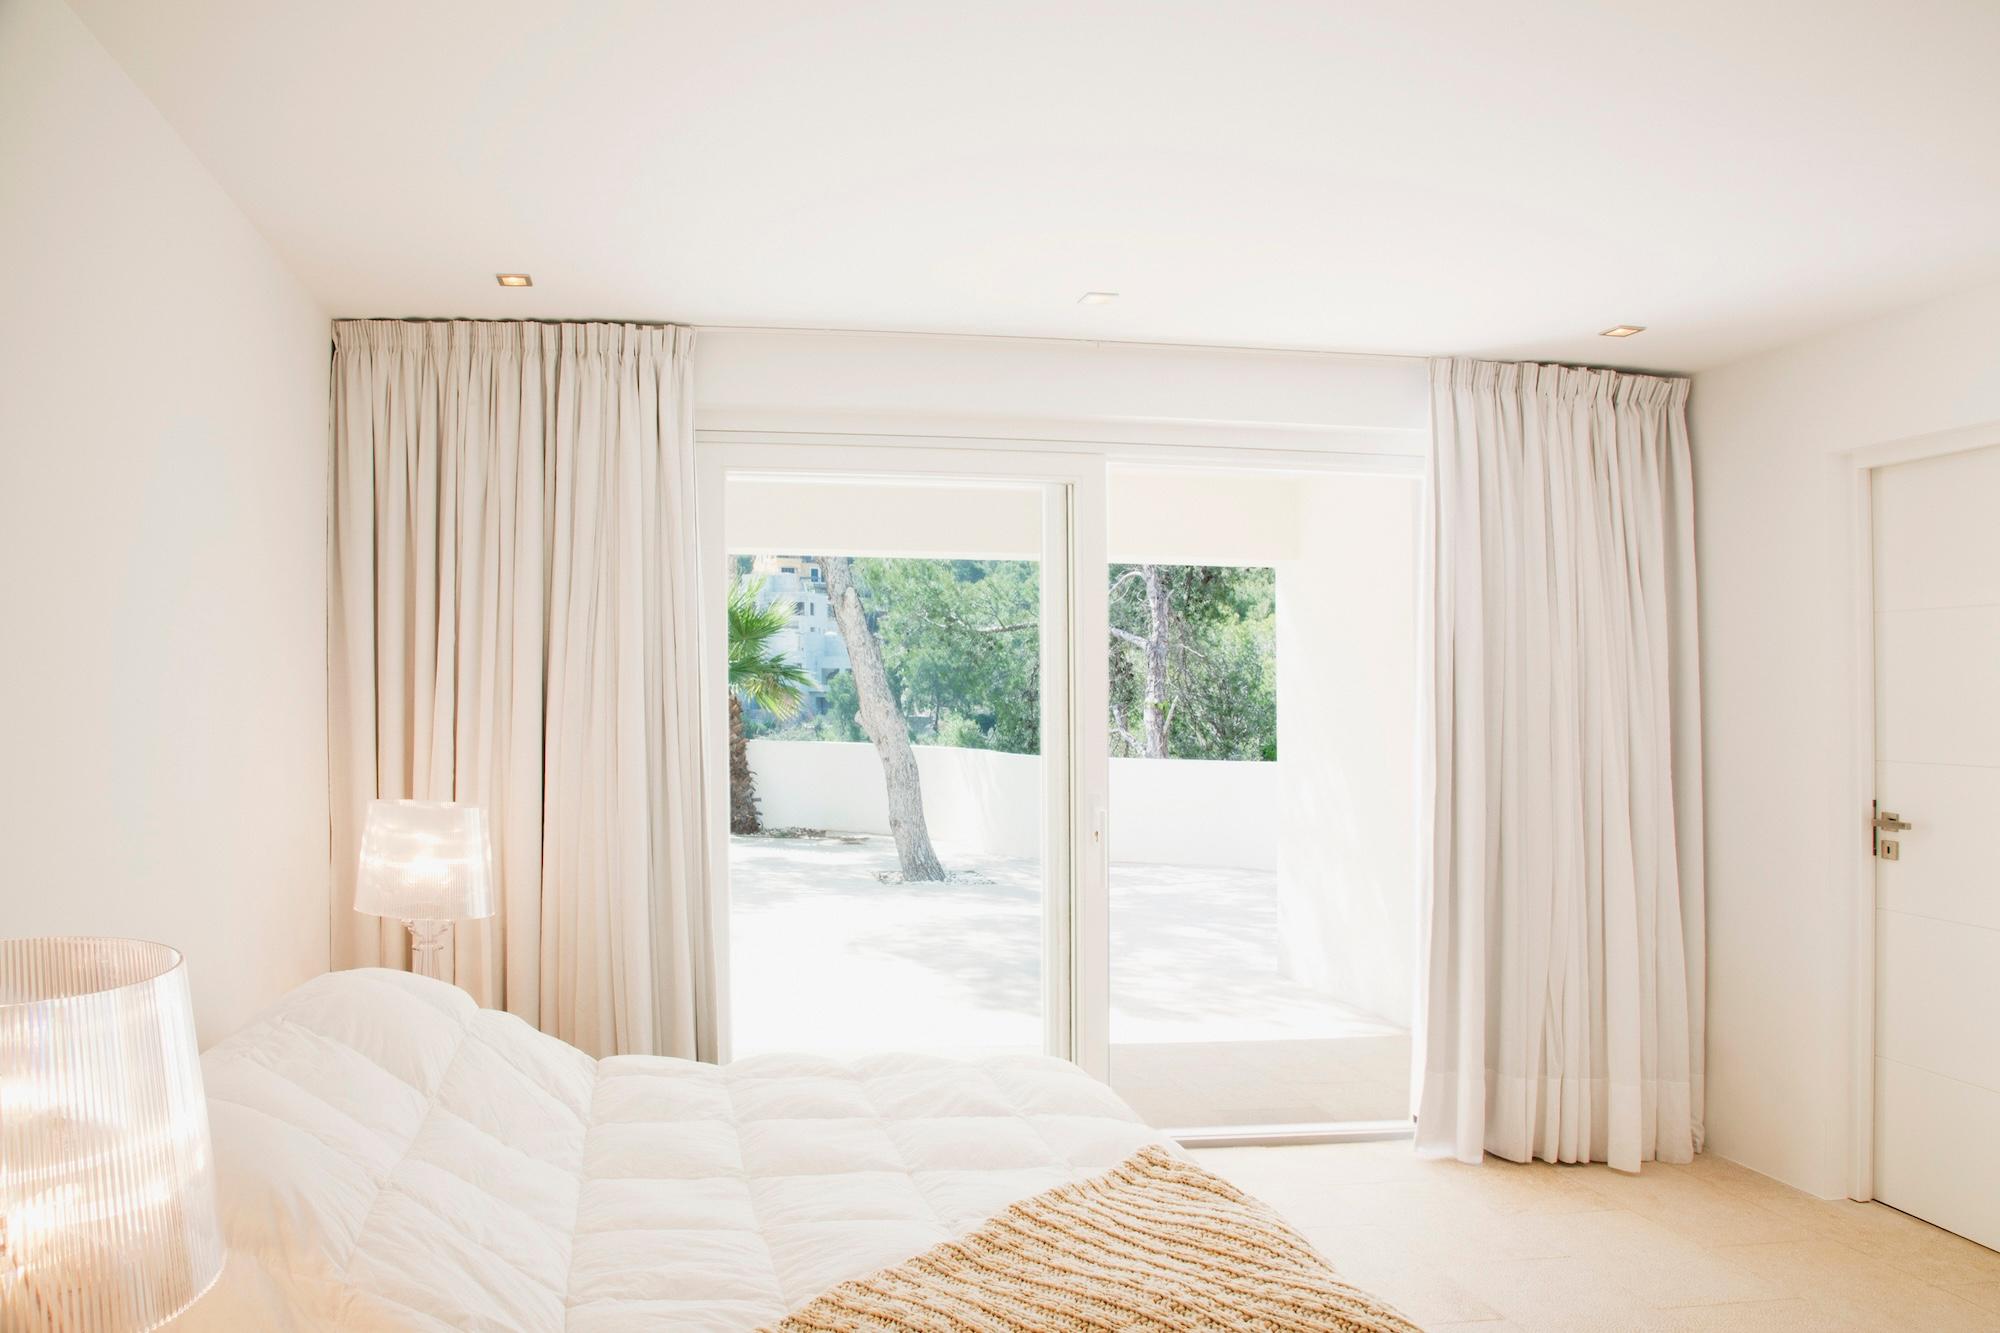 Curtains hanging in front of a sliding door in a bedroom